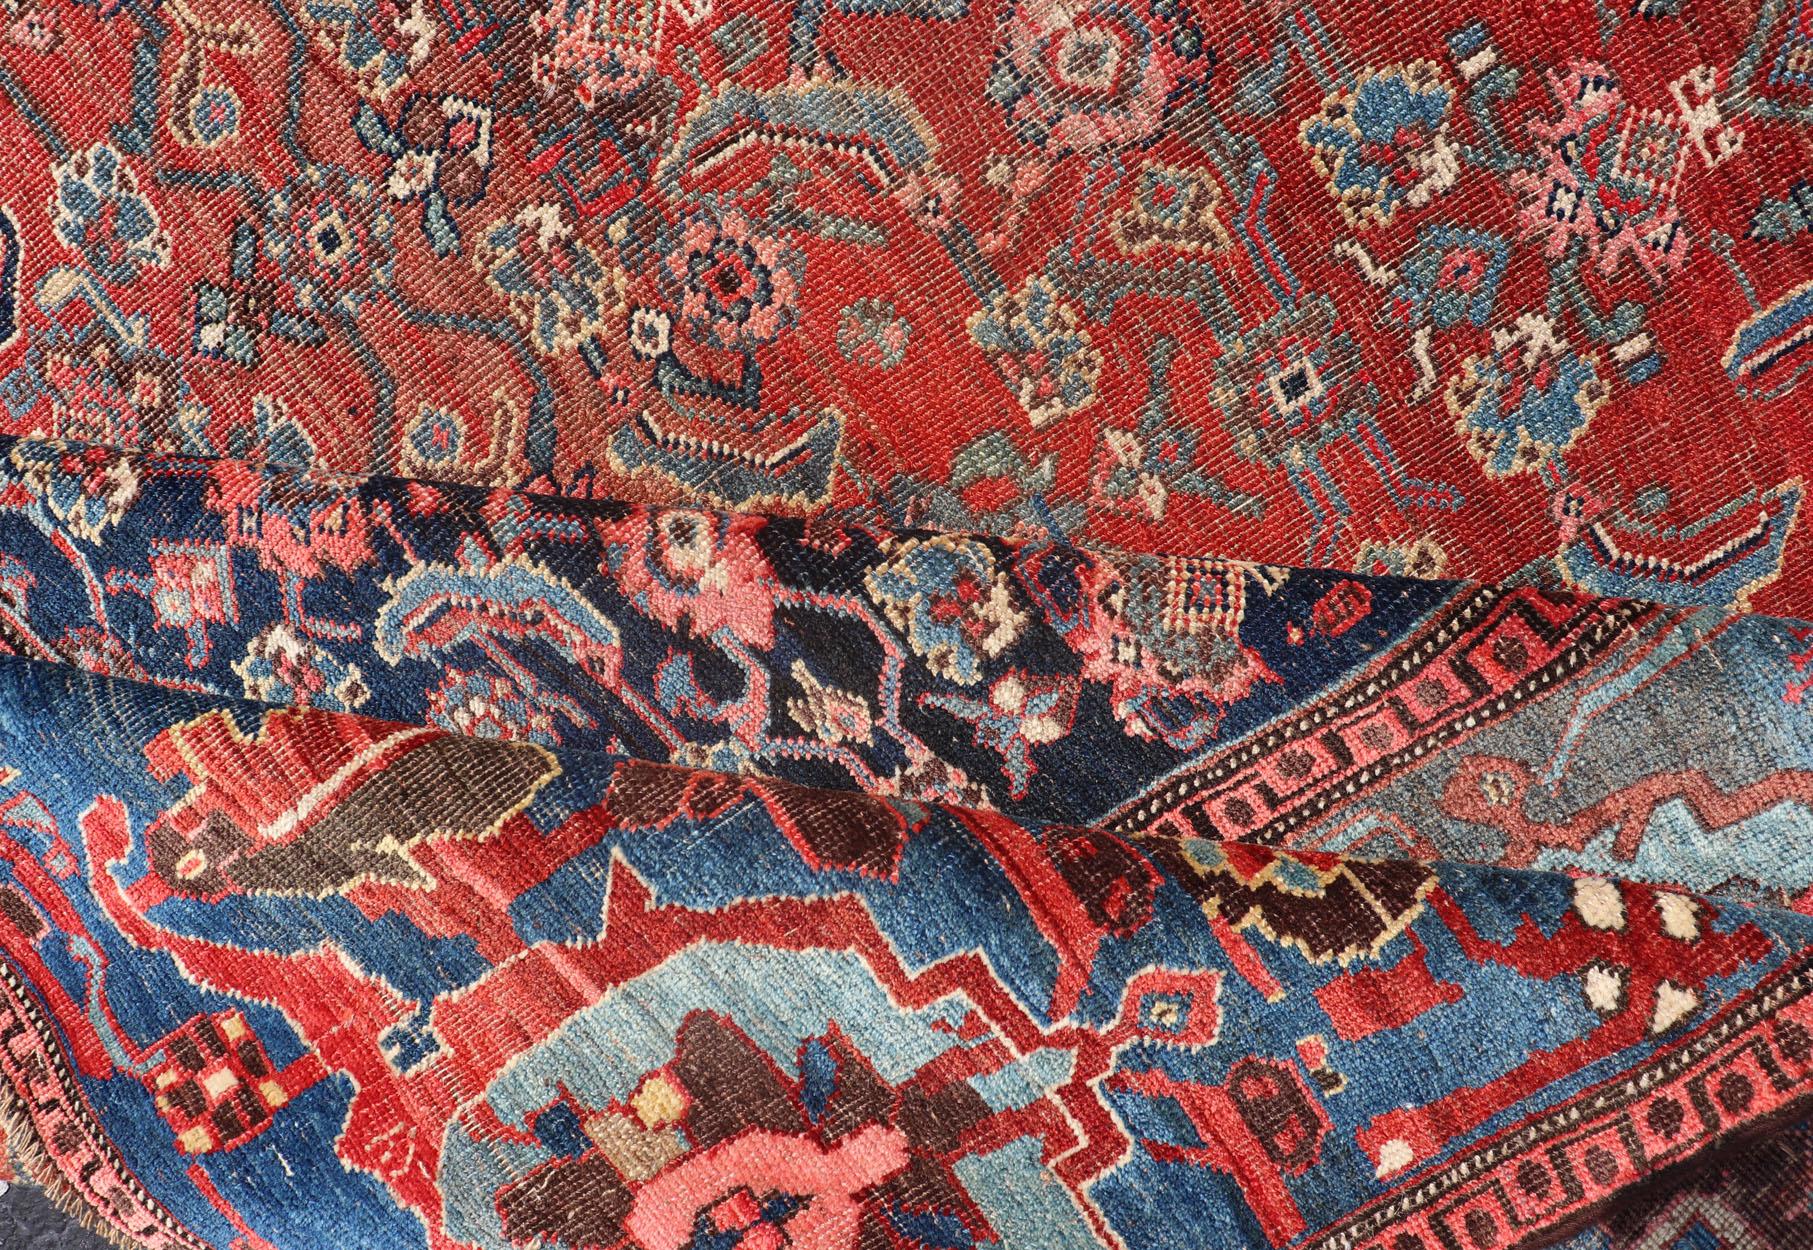 Very Large Antique Persian Bidjar Rug in Multi Shades of Blue, Tera-Cotta & Red For Sale 9